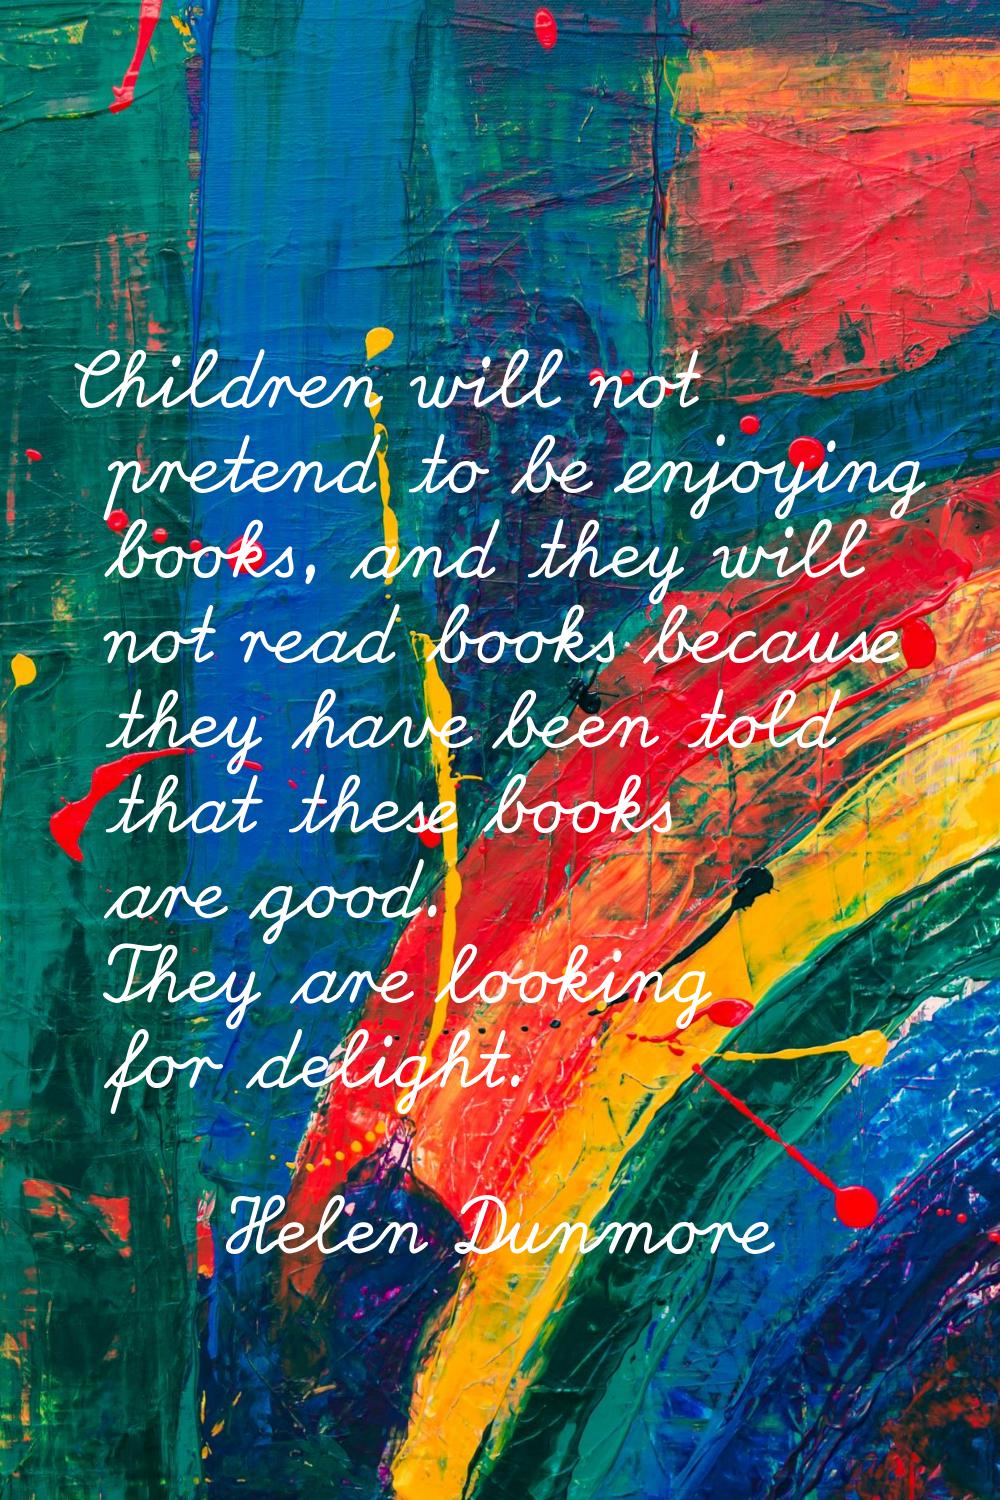 Children will not pretend to be enjoying books, and they will not read books because they have been